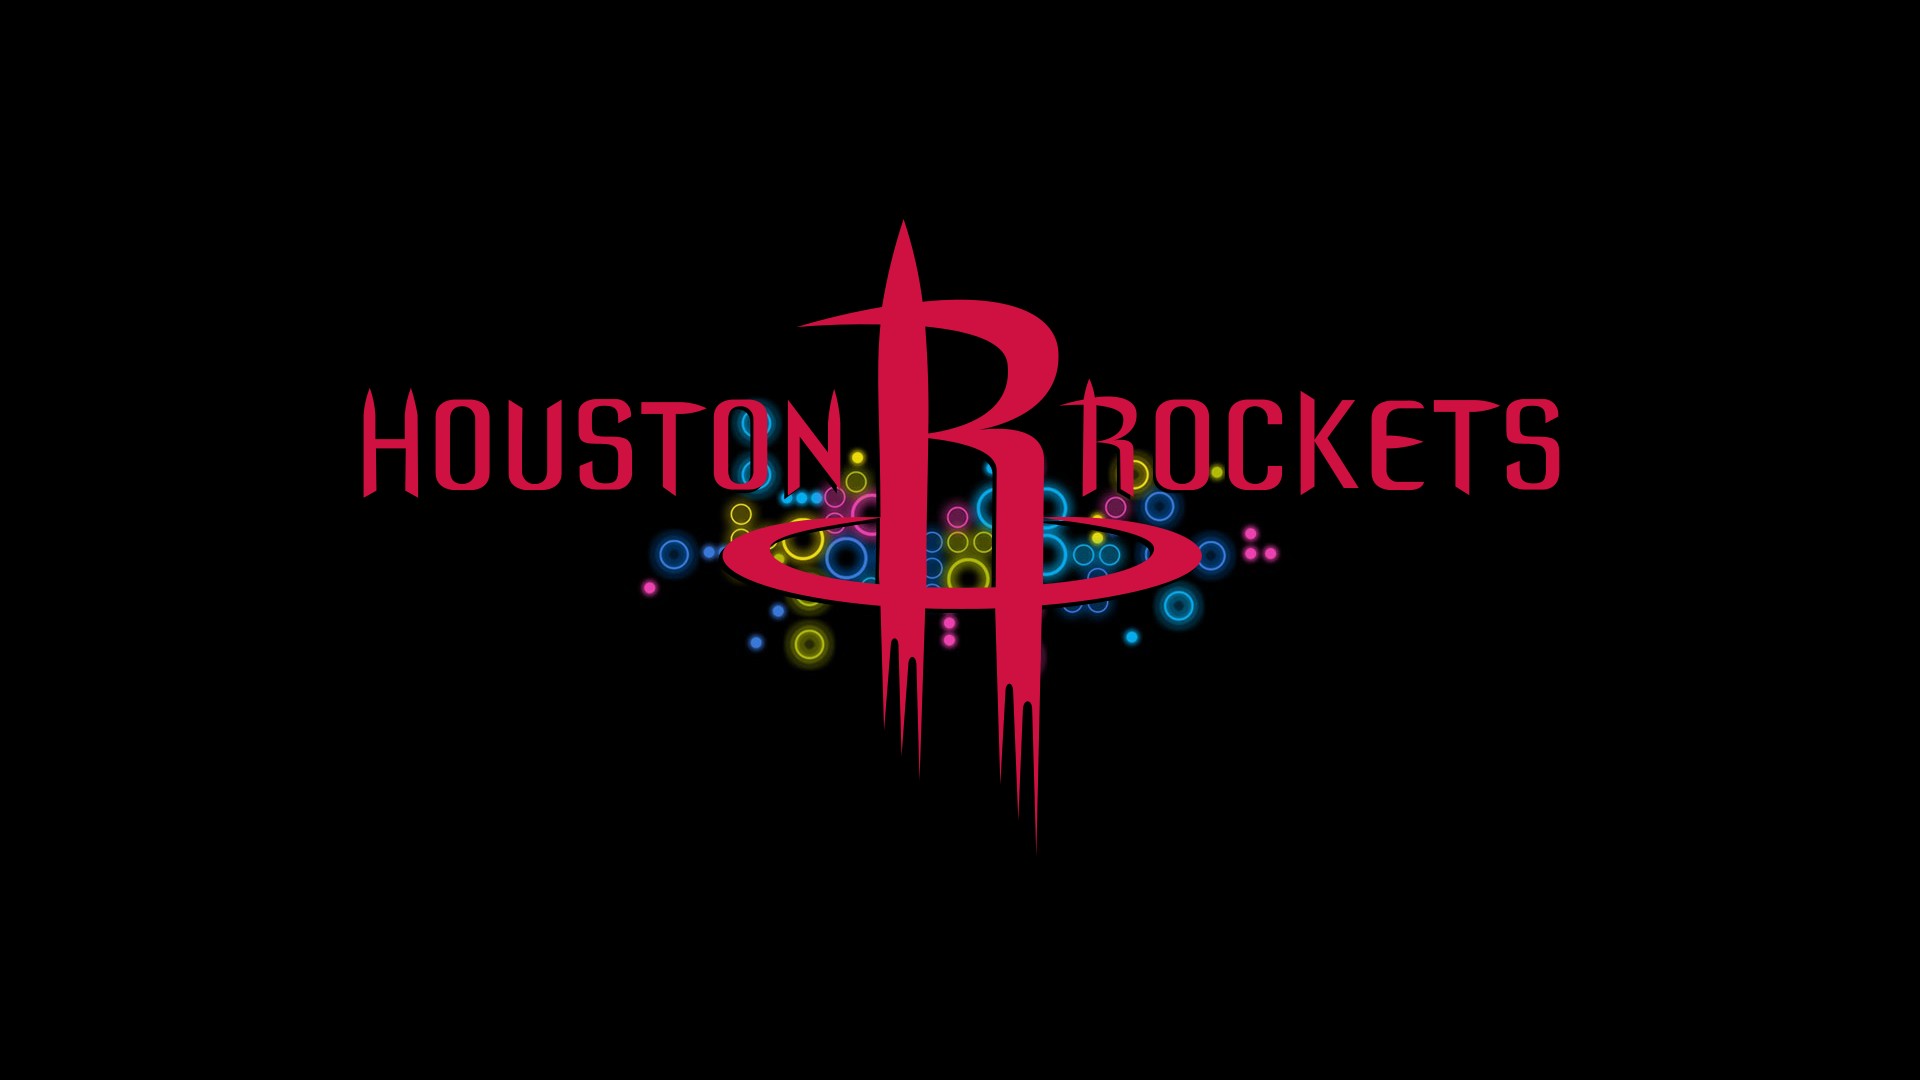 Rockets For PC Wallpaper with image dimensions 1920x1080 pixel. You can make this wallpaper for your Desktop Computer Backgrounds, Windows or Mac Screensavers, iPhone Lock screen, Tablet or Android and another Mobile Phone device